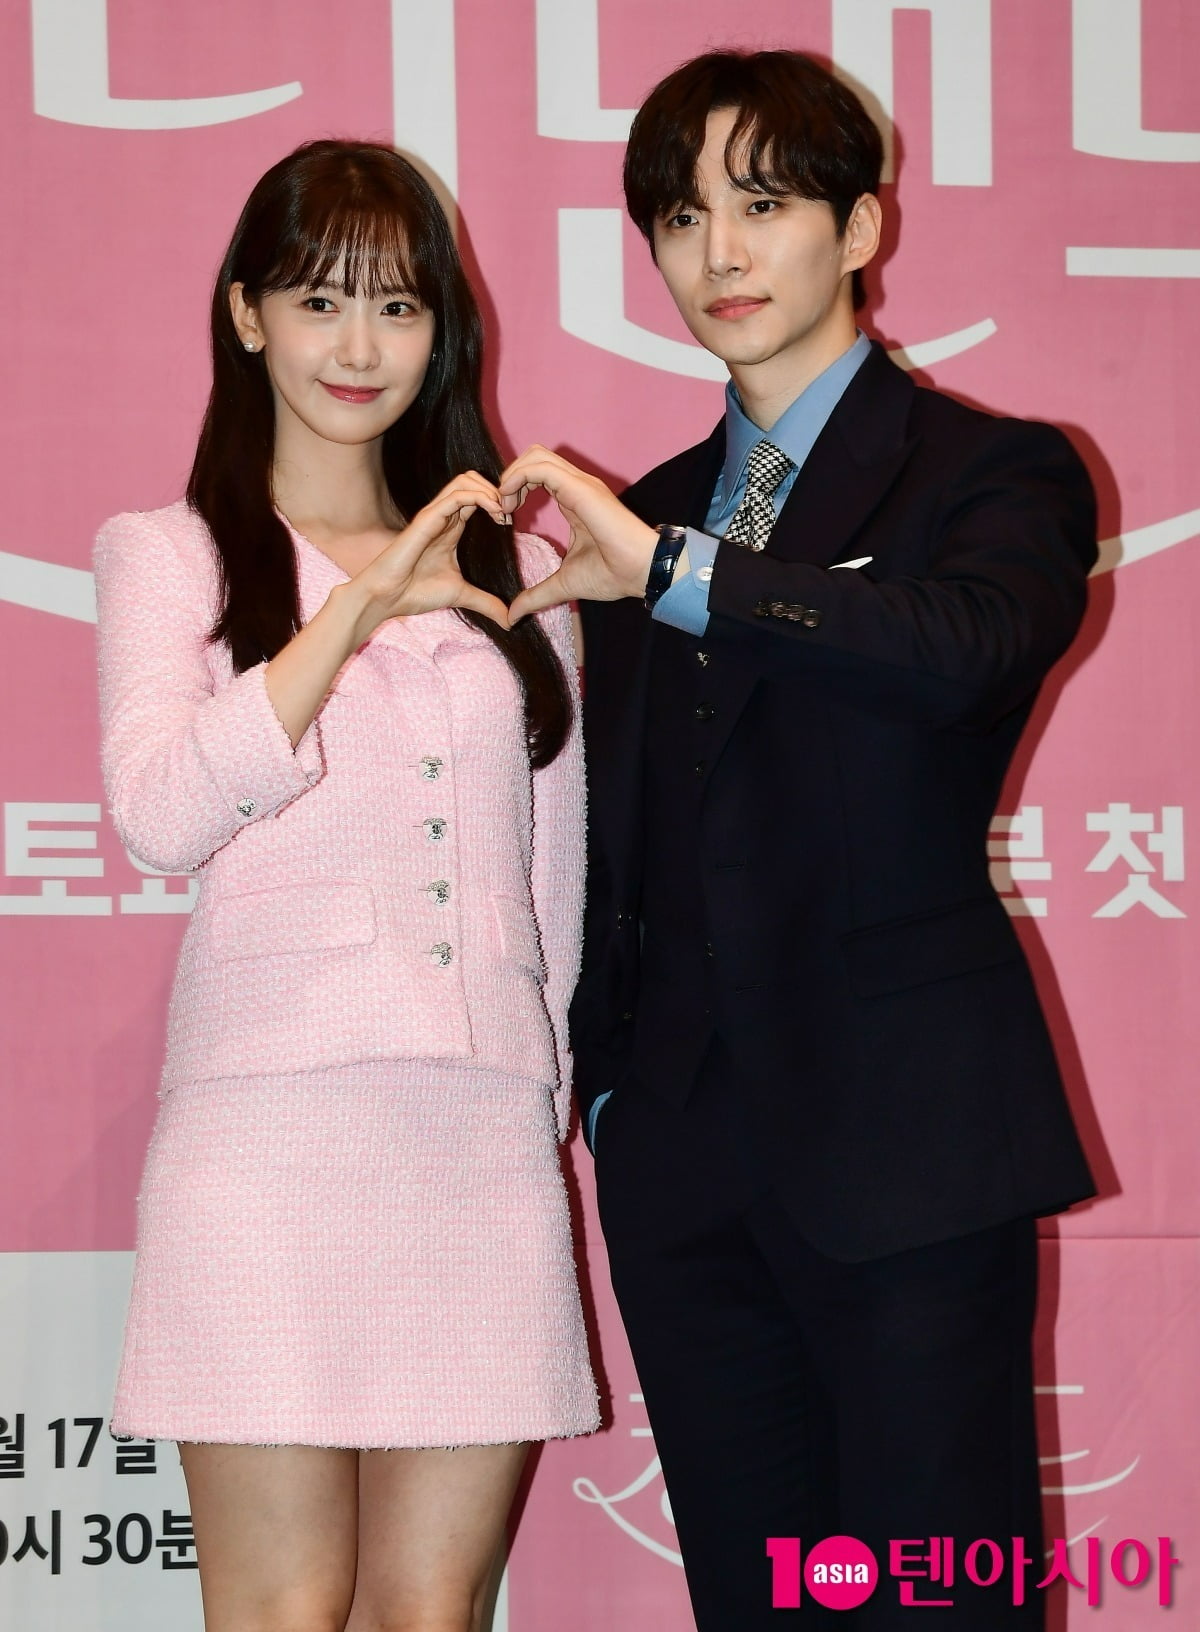 Lee Jun-ho and Lim Yoon-ah, ranked 1st and 2nd in topicality for 5 consecutive weeks